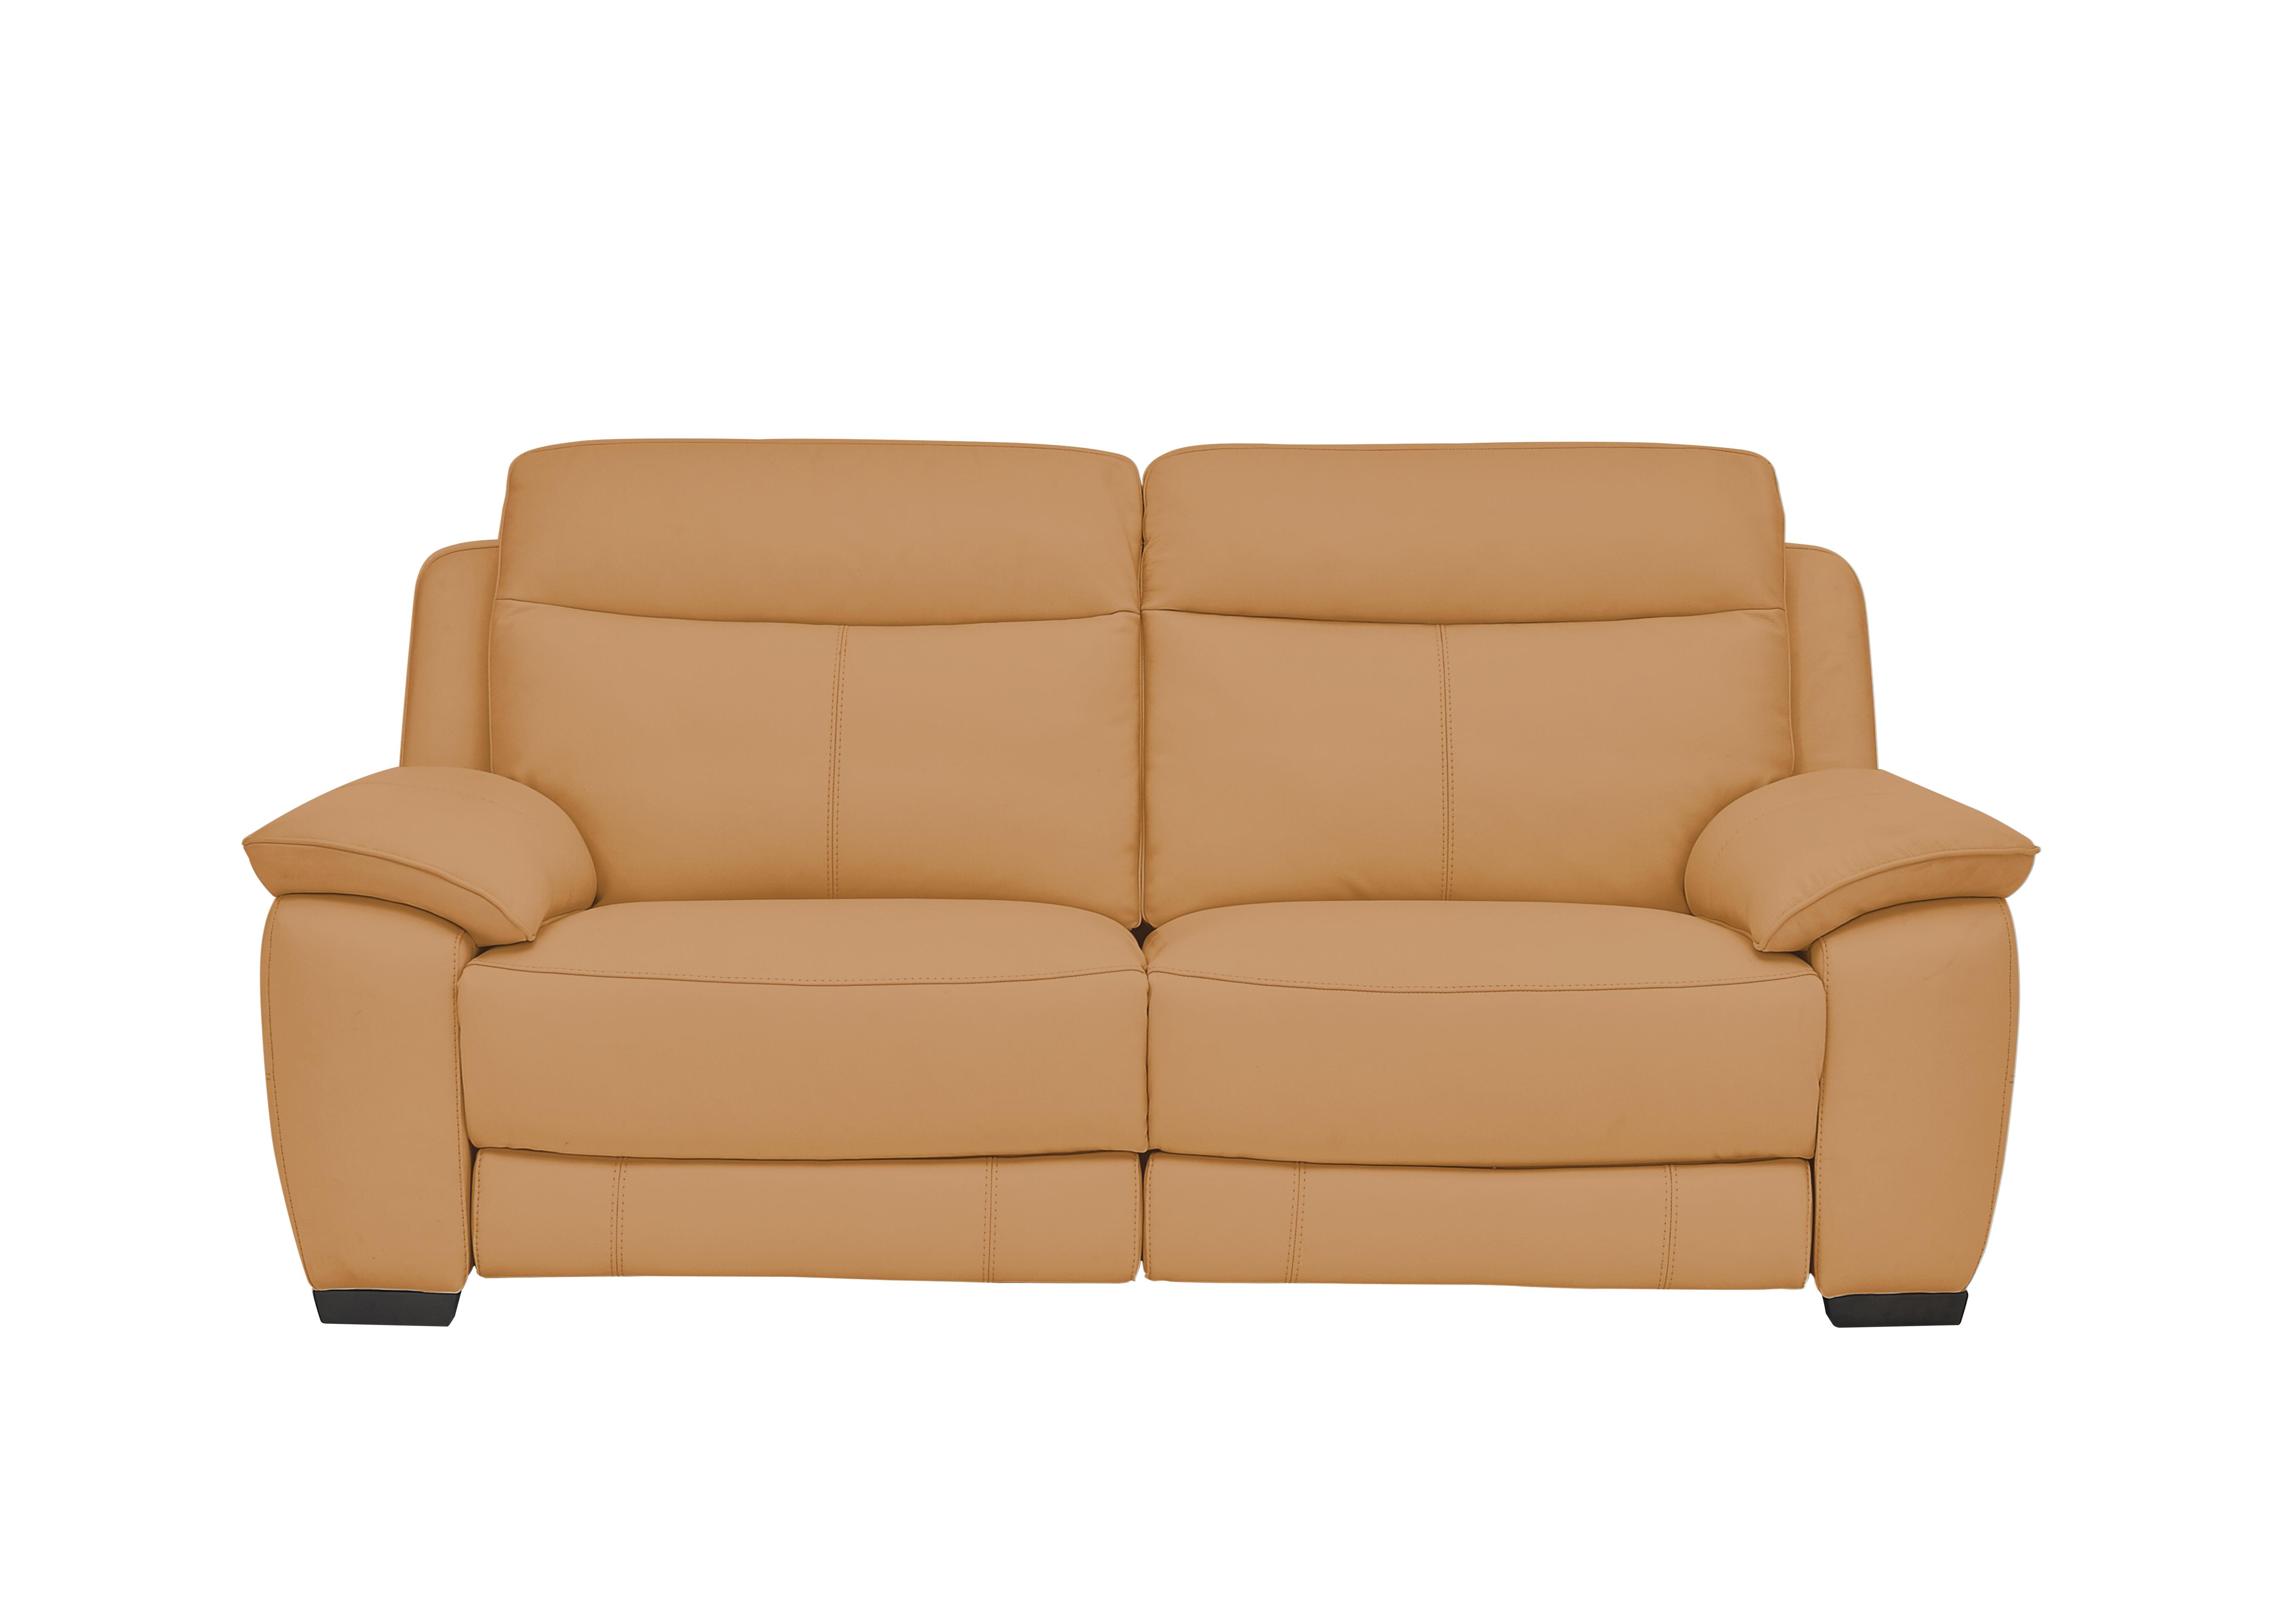 Starlight Express 3 Seater Leather Recliner Sofa with Power Headrests in Bv-335e Honey Yellow on Furniture Village